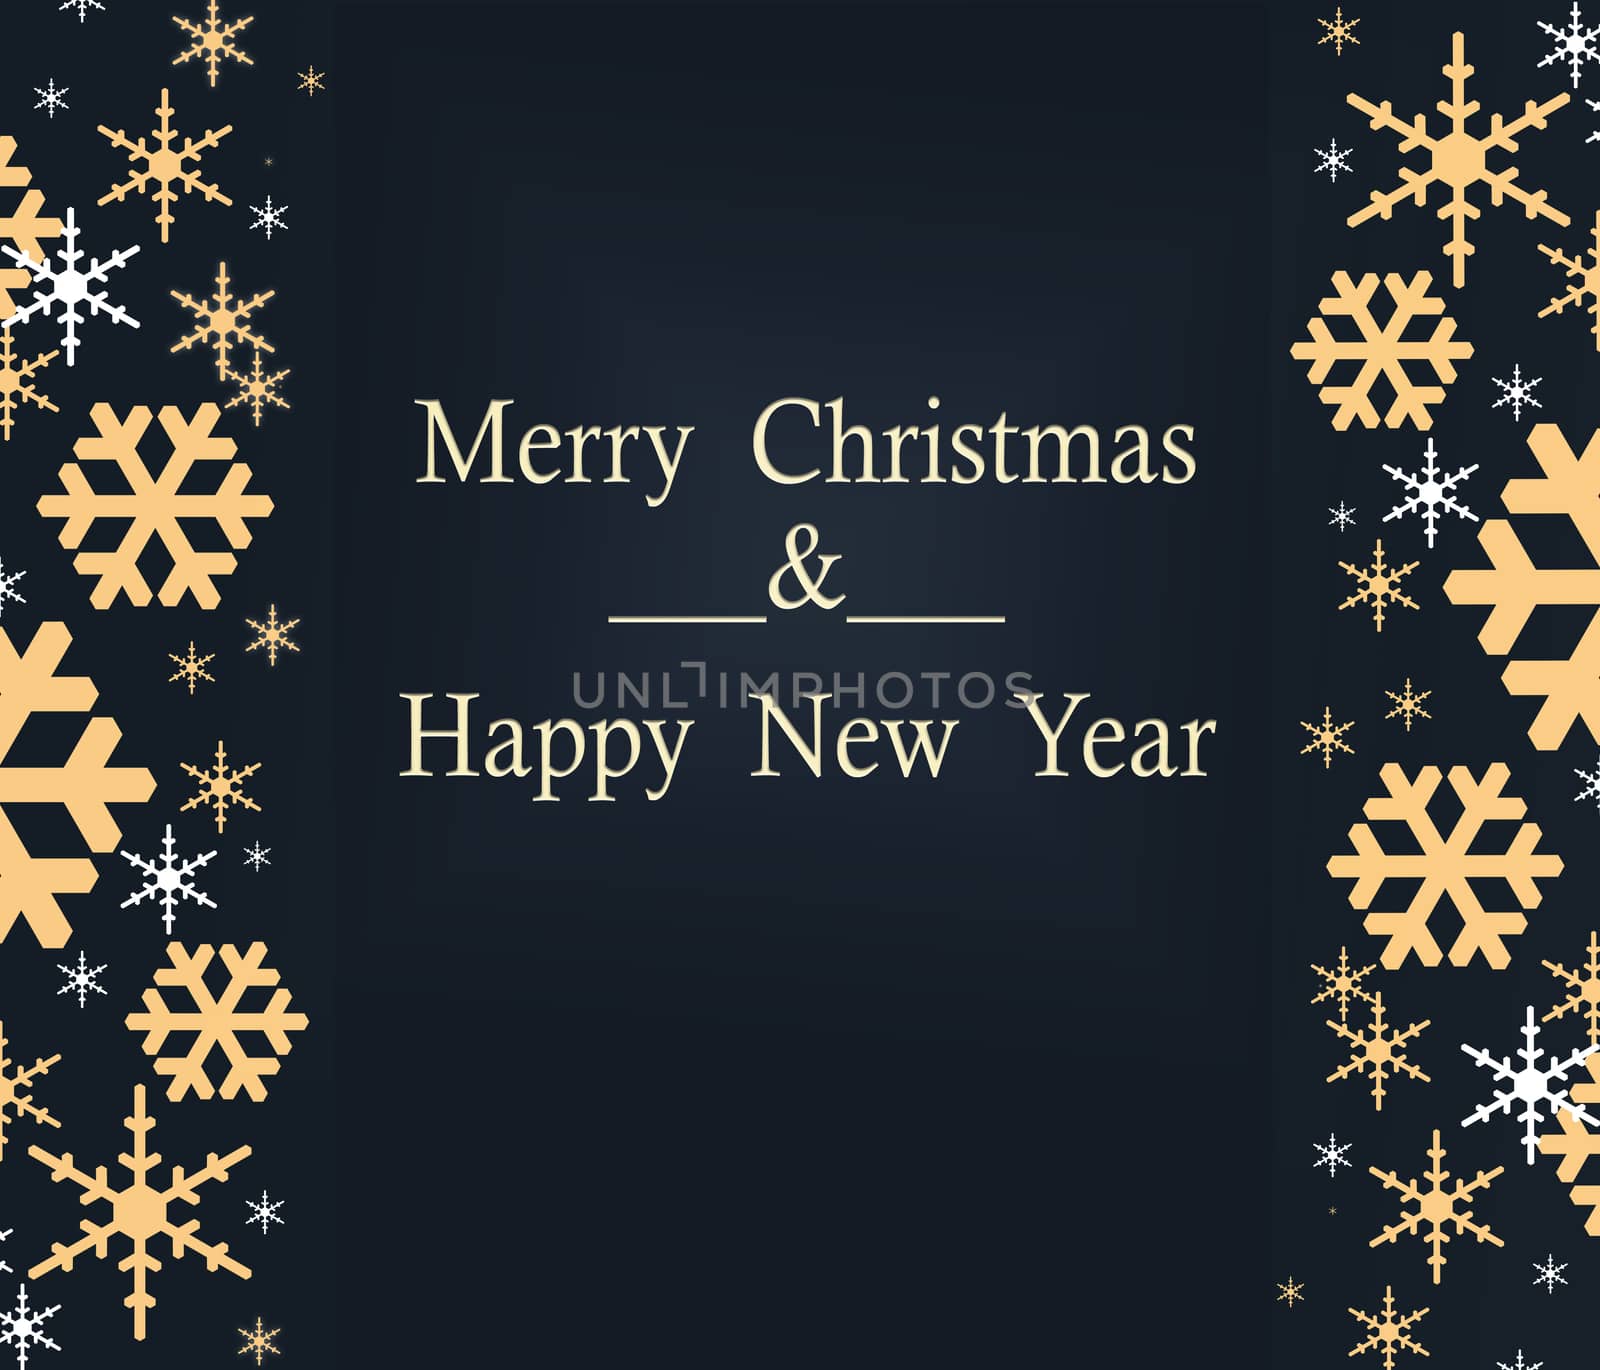 Text Merry Christmas and Happy New Year. Illustration on dark blue dramatic background. Luxury Christmas and New Year background with shining golden snowflakes. 3D illustration